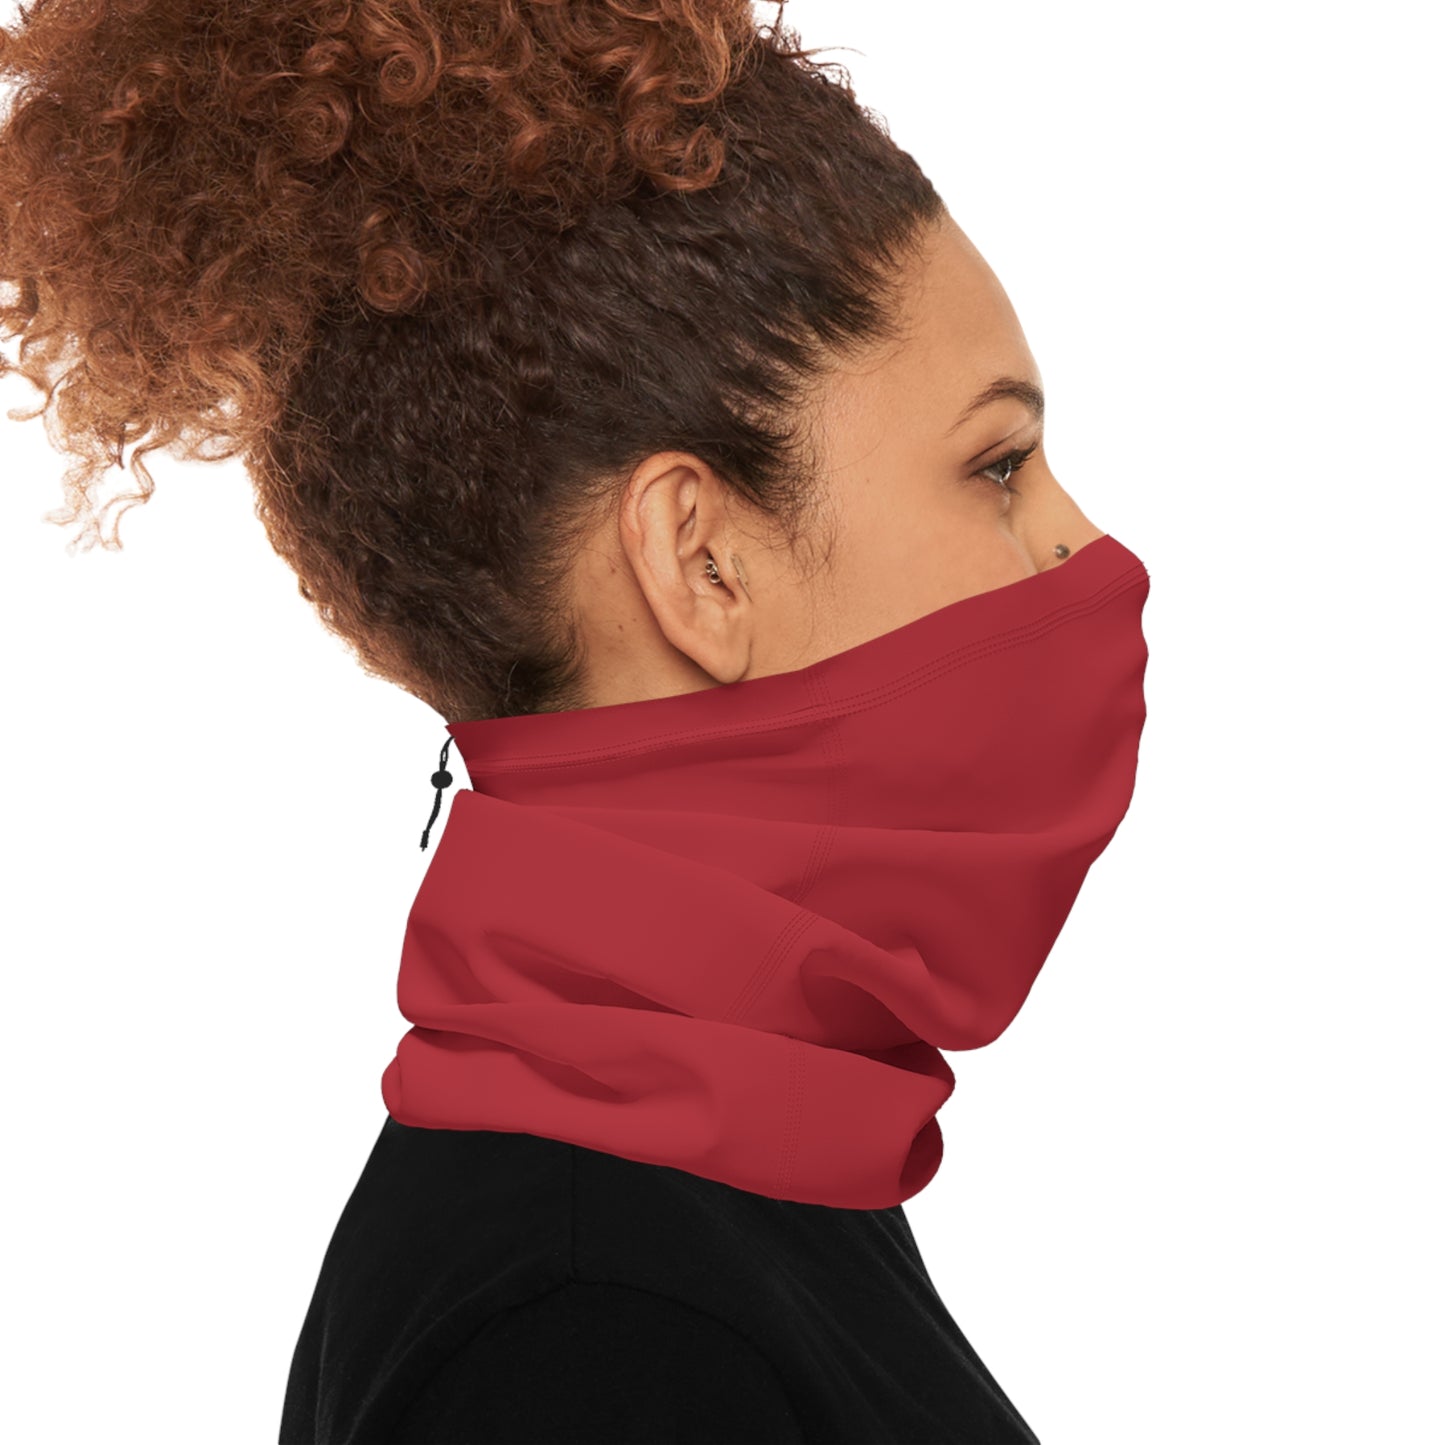 Winter Neck Gaiter With Drawstring - Red